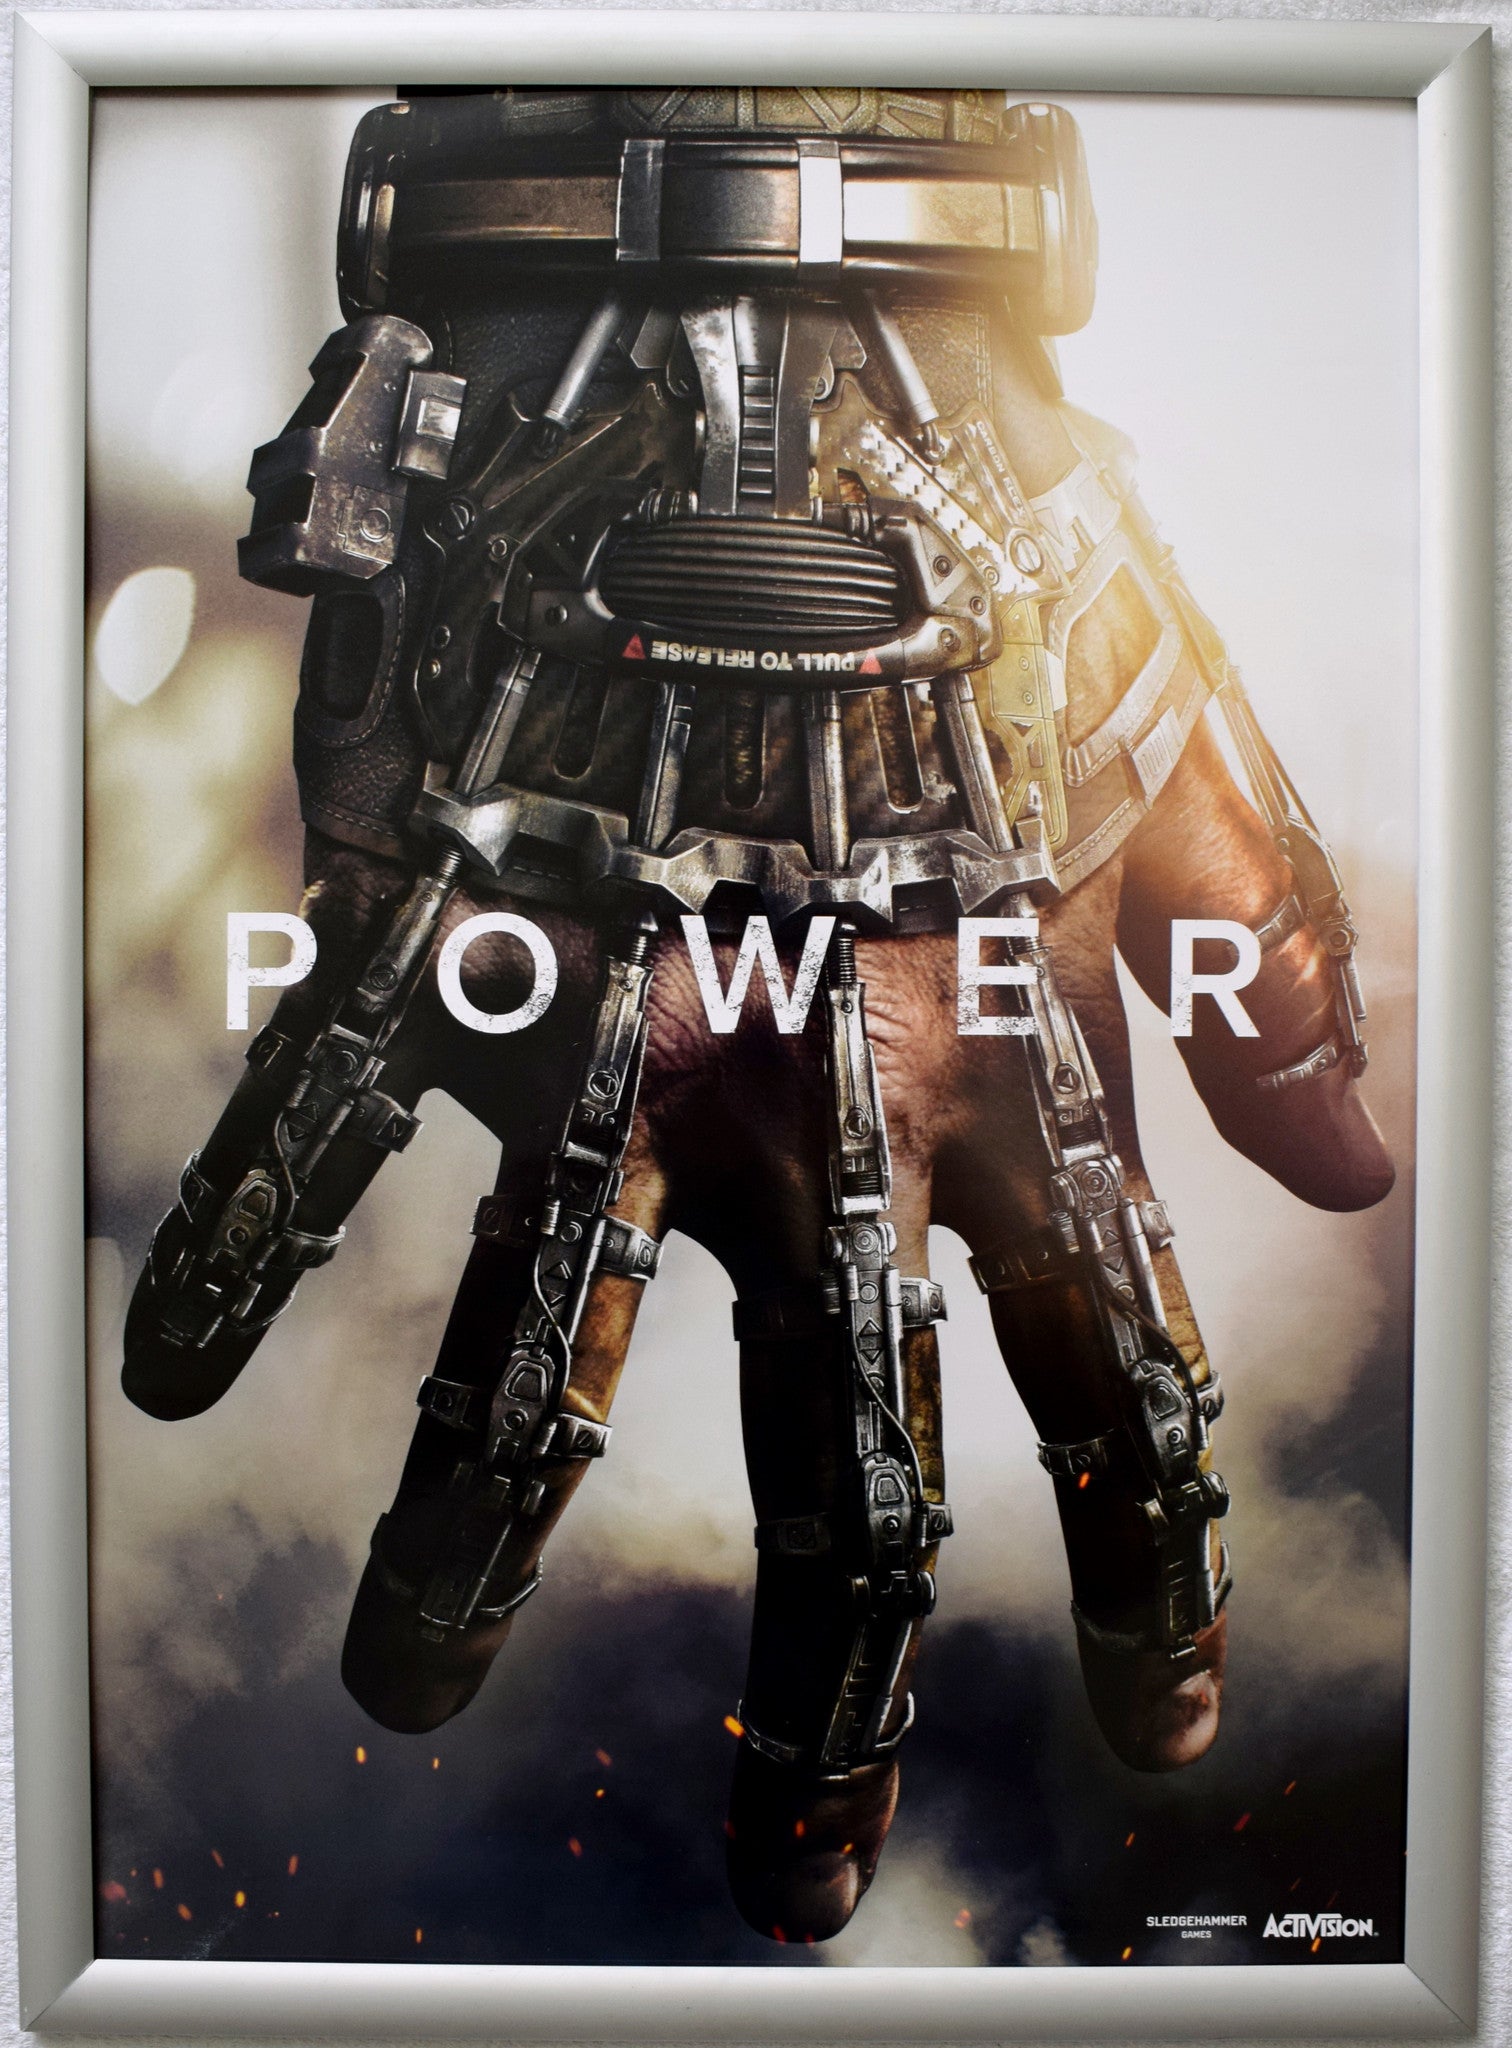 Call of Duty Advanced Warfare (A2) Promotional Poster Set of 4